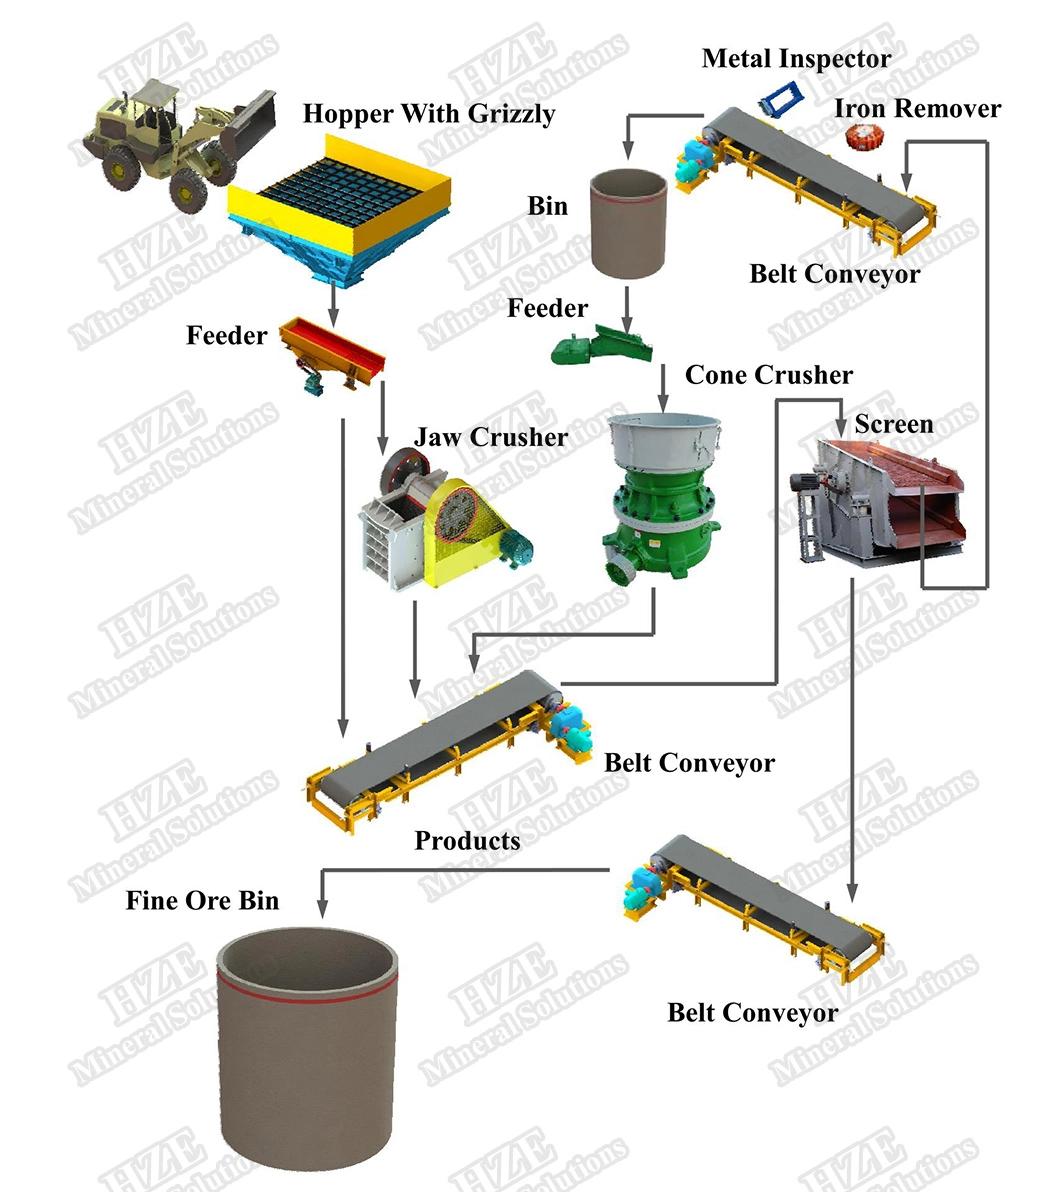 Rock Ore Crushing Circuit and Equipment with Flowchart